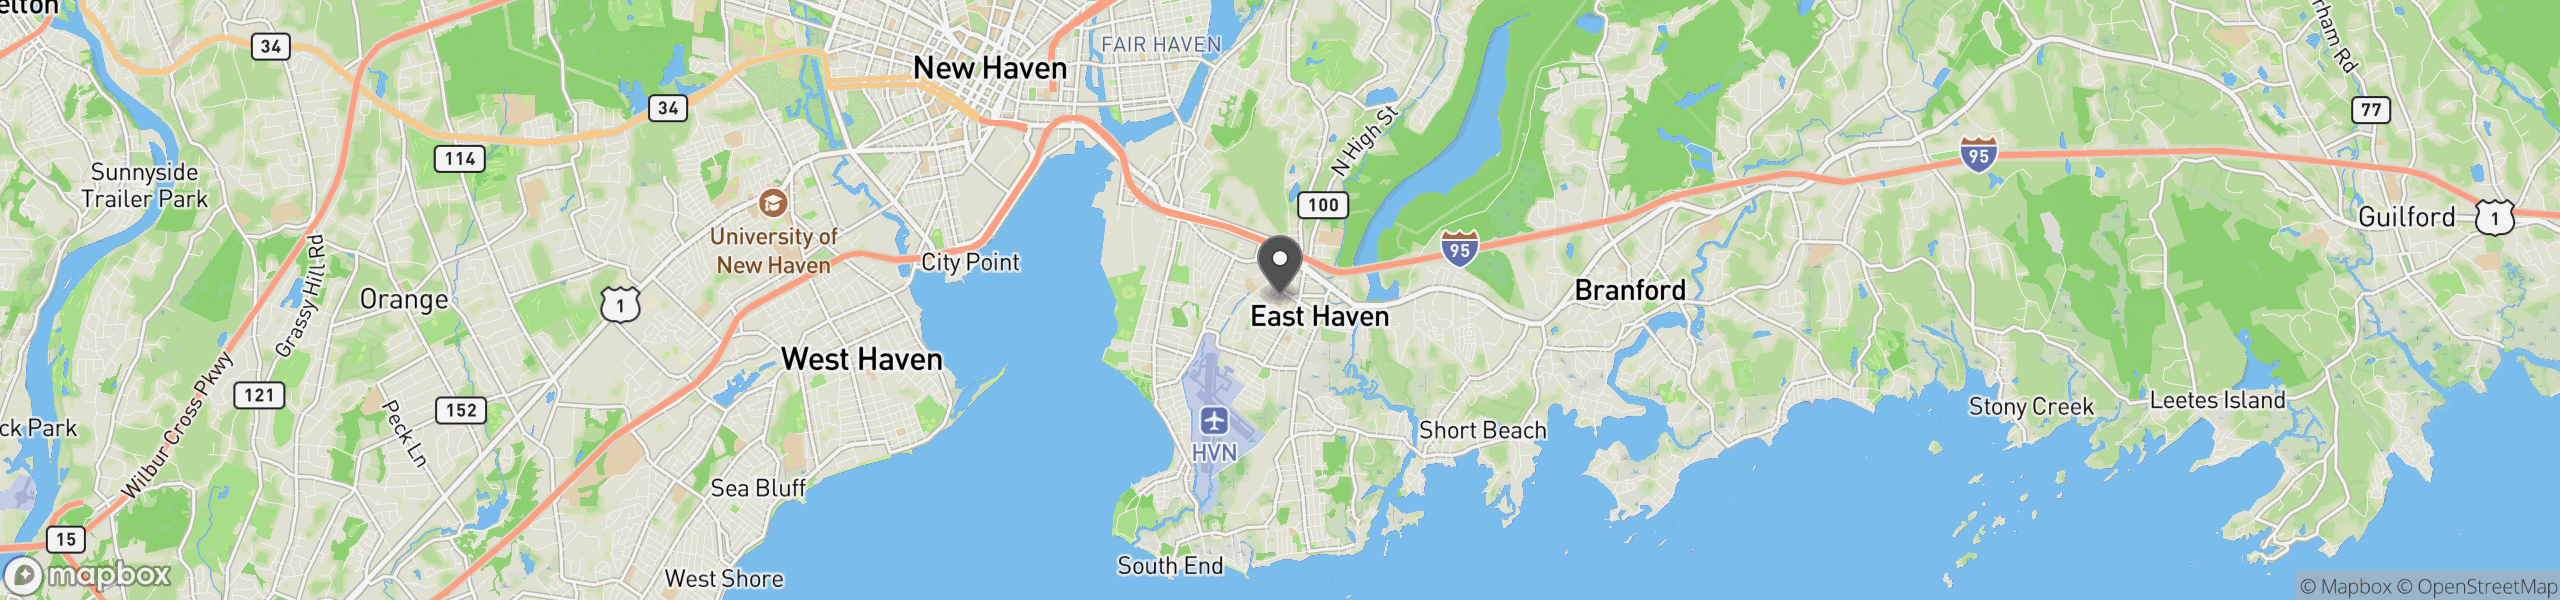 East Haven, CT